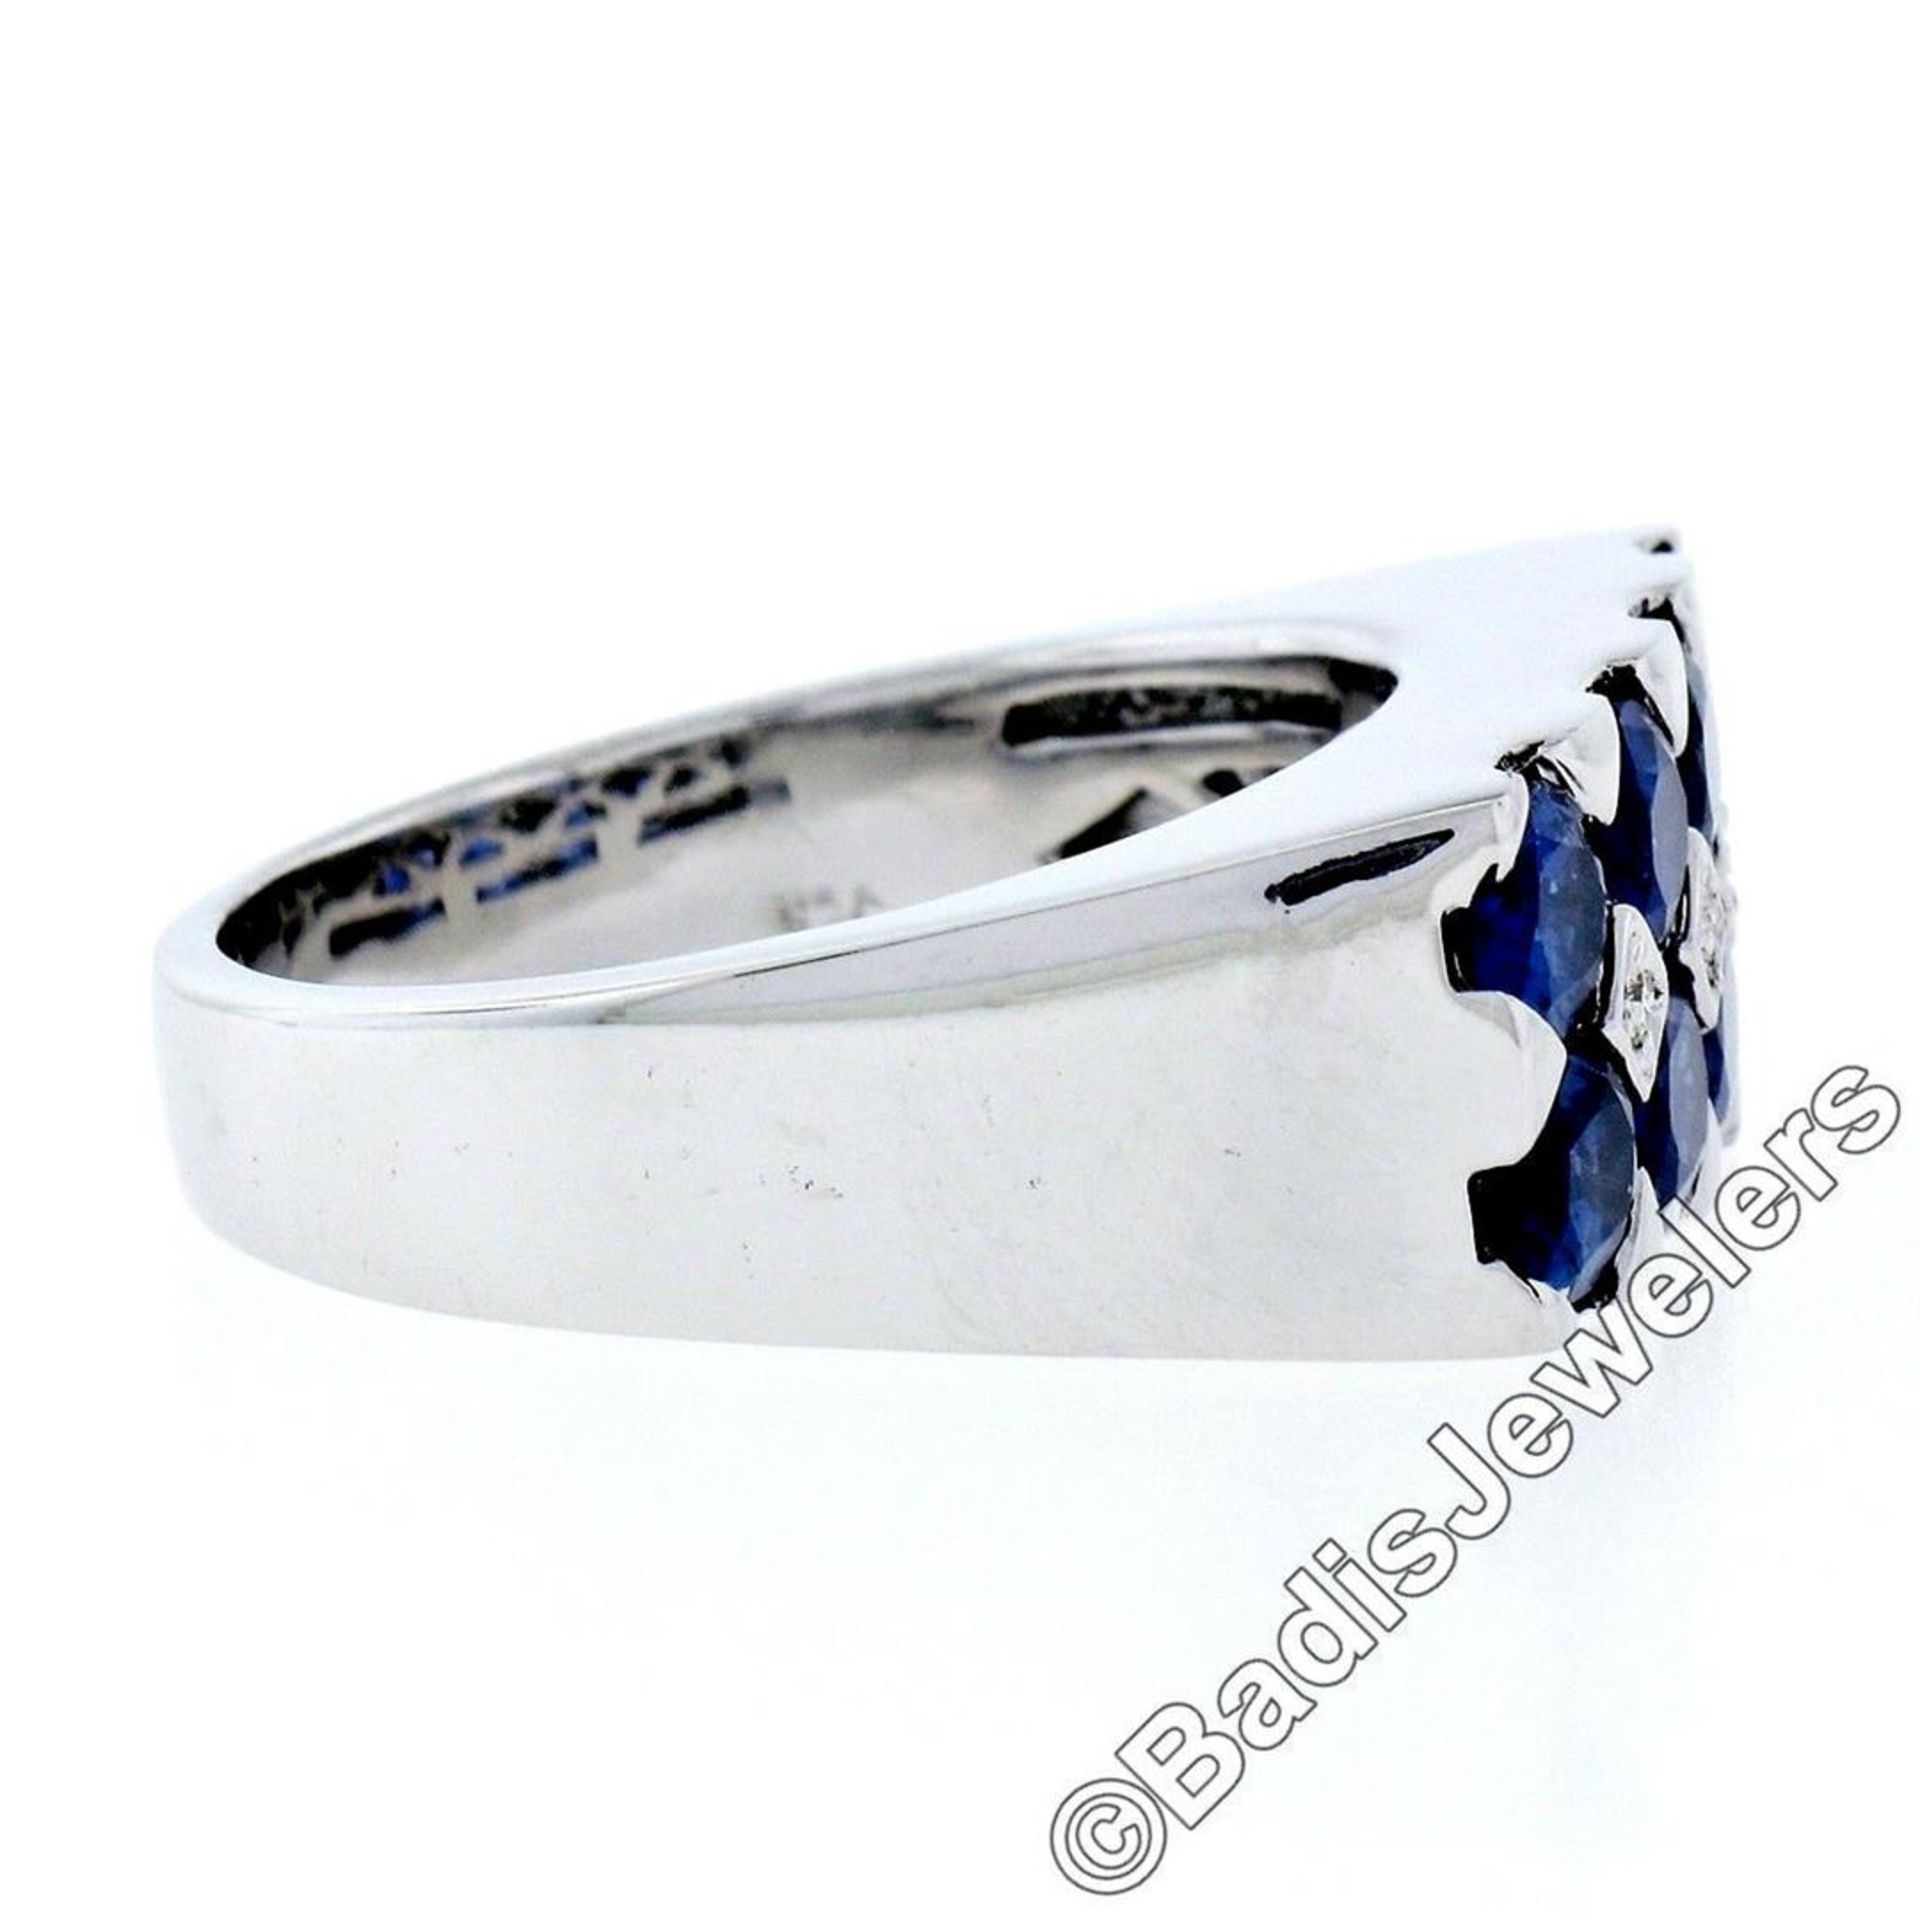 18kt White Gold 4.03 ctw Dual Row Oval Cut Sapphire & Diamond Band Ring - Image 8 of 9